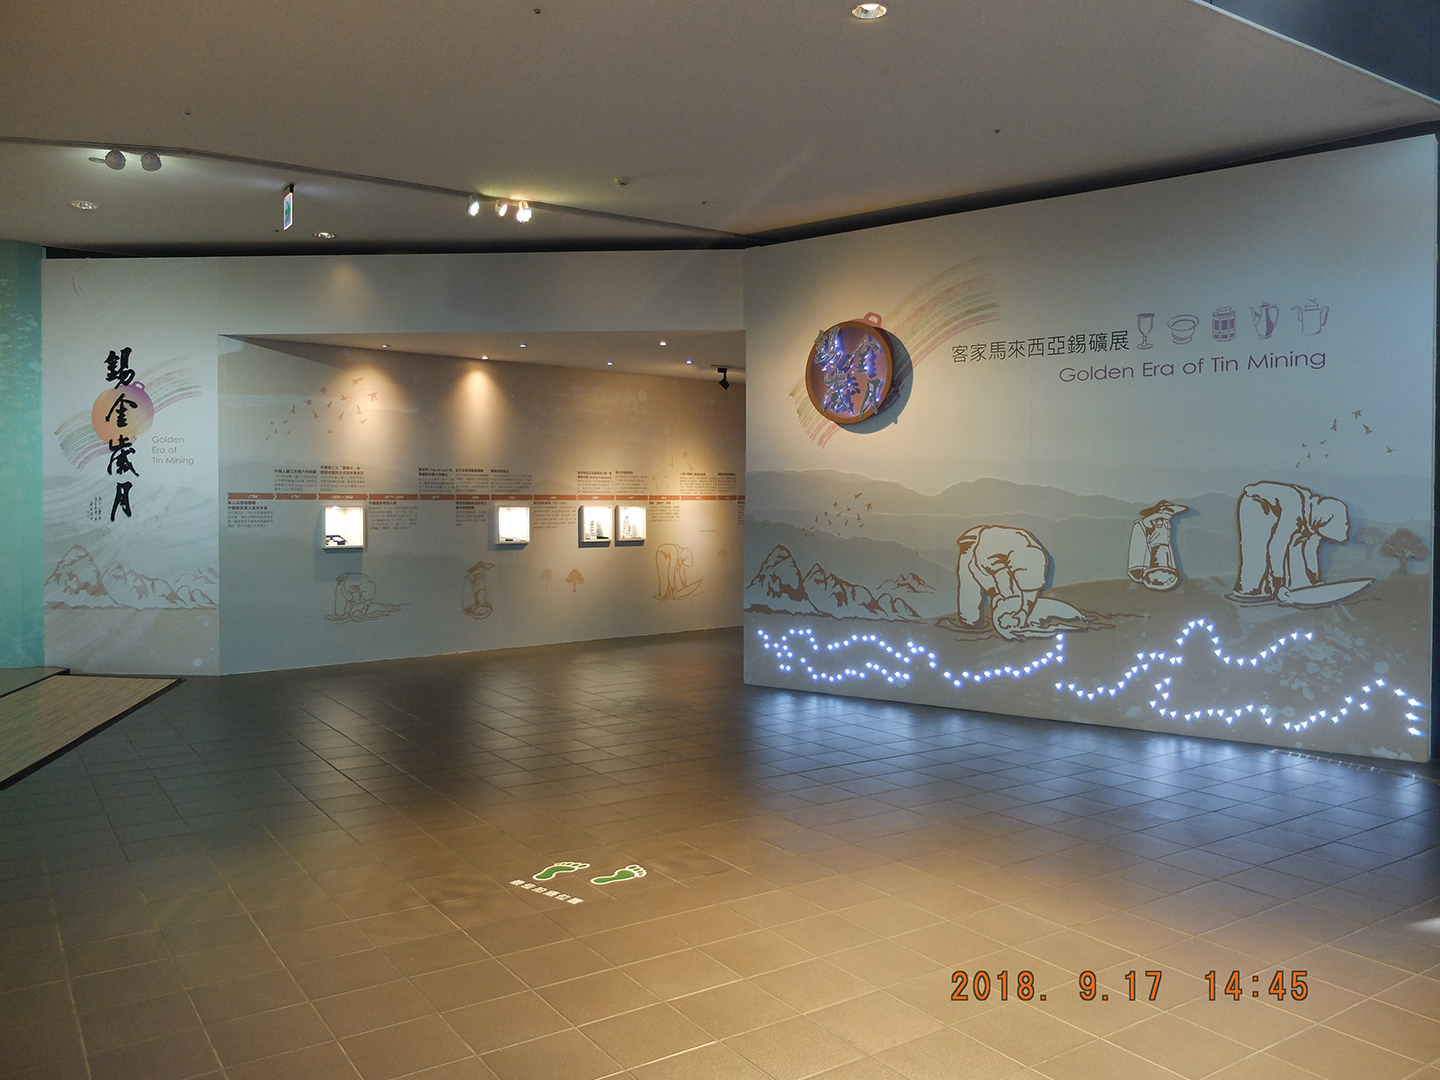 2nd Special Exhibition Hall – “Tin Mining and Hakka in Malaysia: An Exhibiition” 主圖